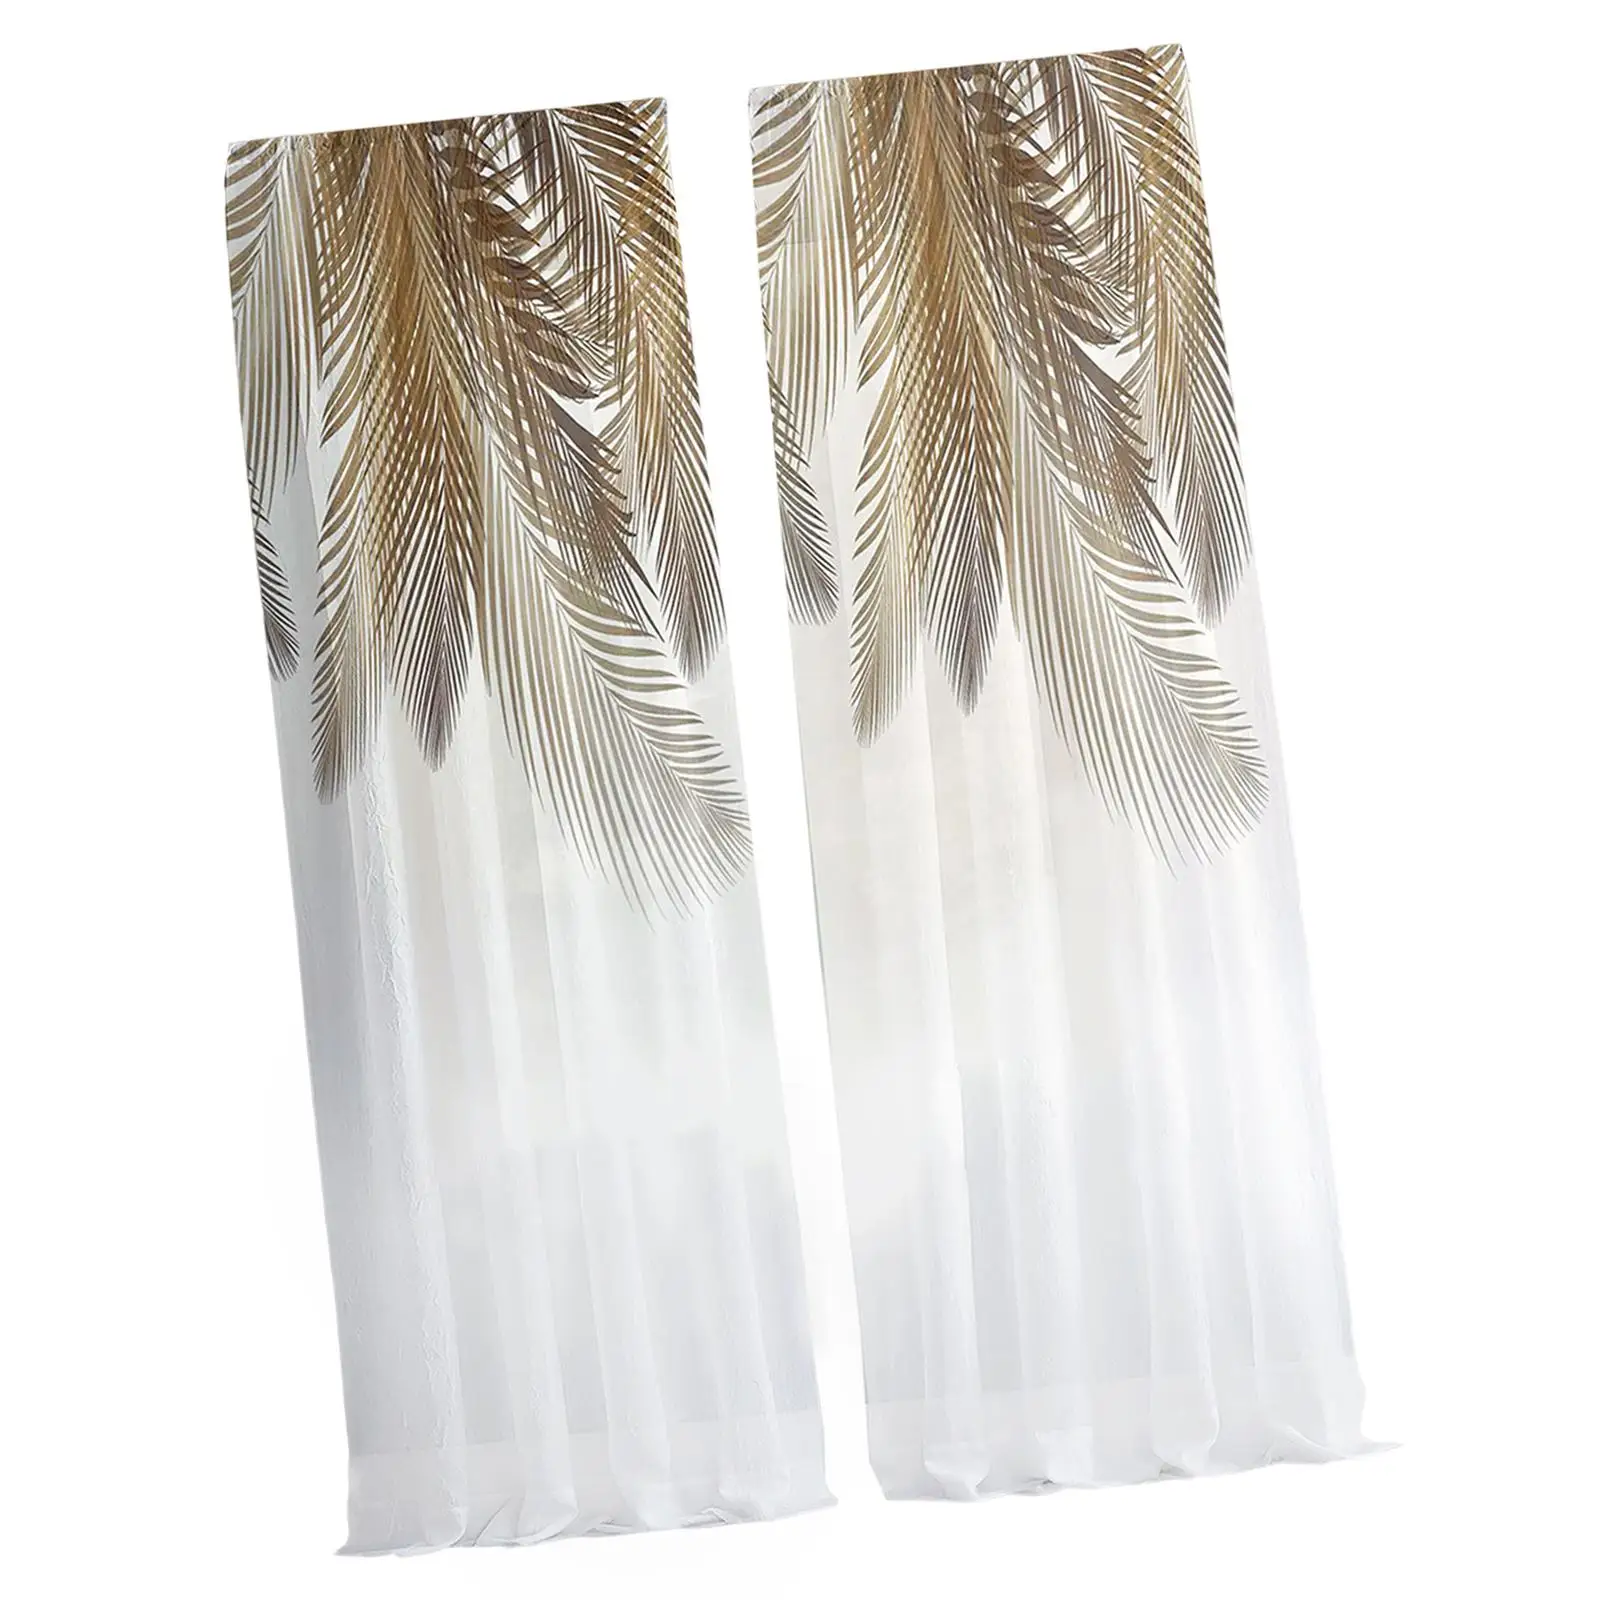 Printed Sheer Curtains 2 Panels 52 x 95 Inches Sheer Drapes for